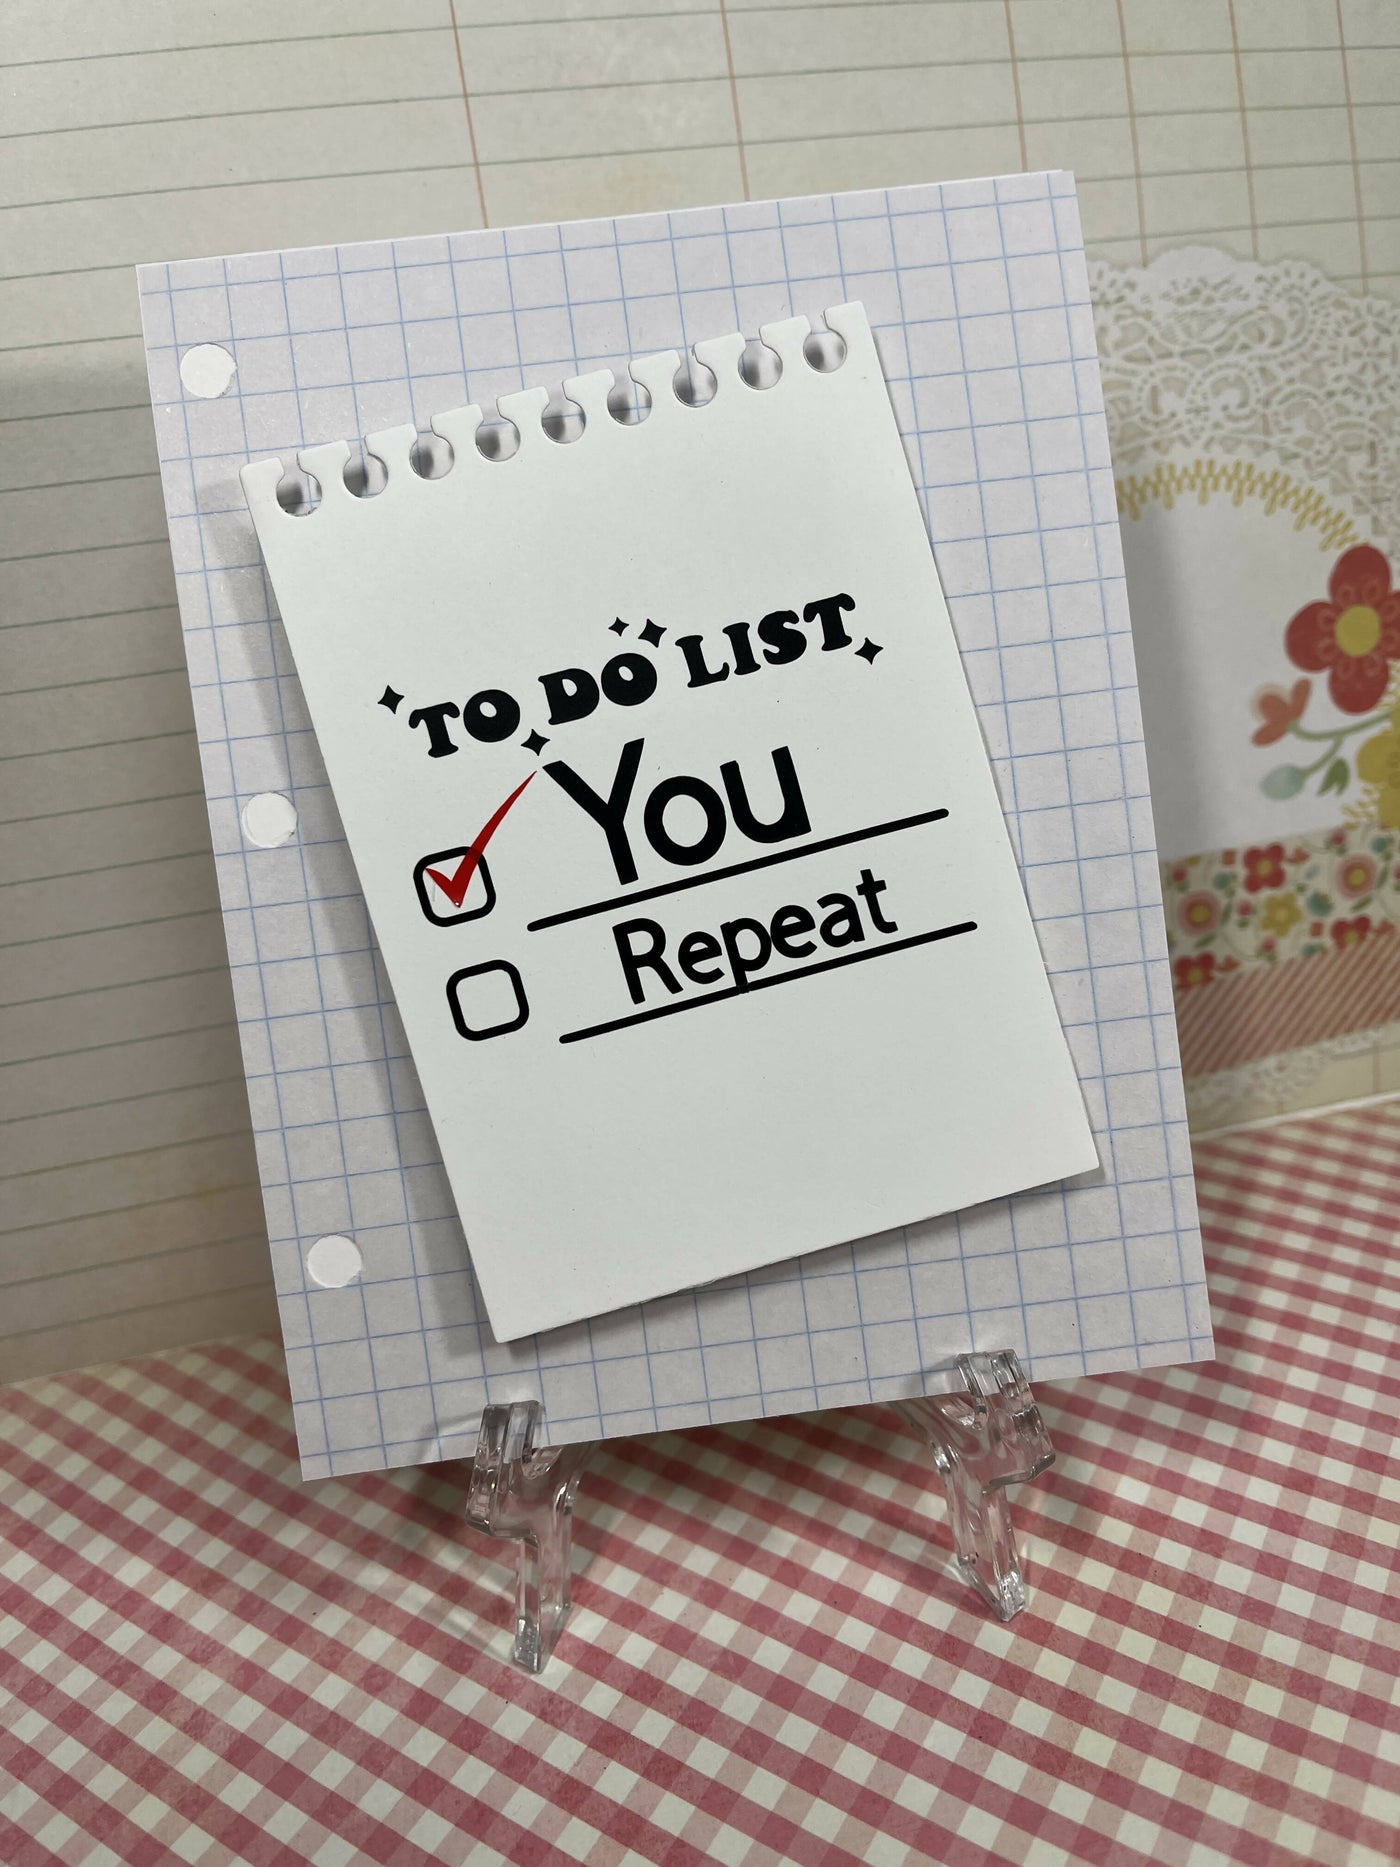 To Do List - You - Valentine’s Day Card